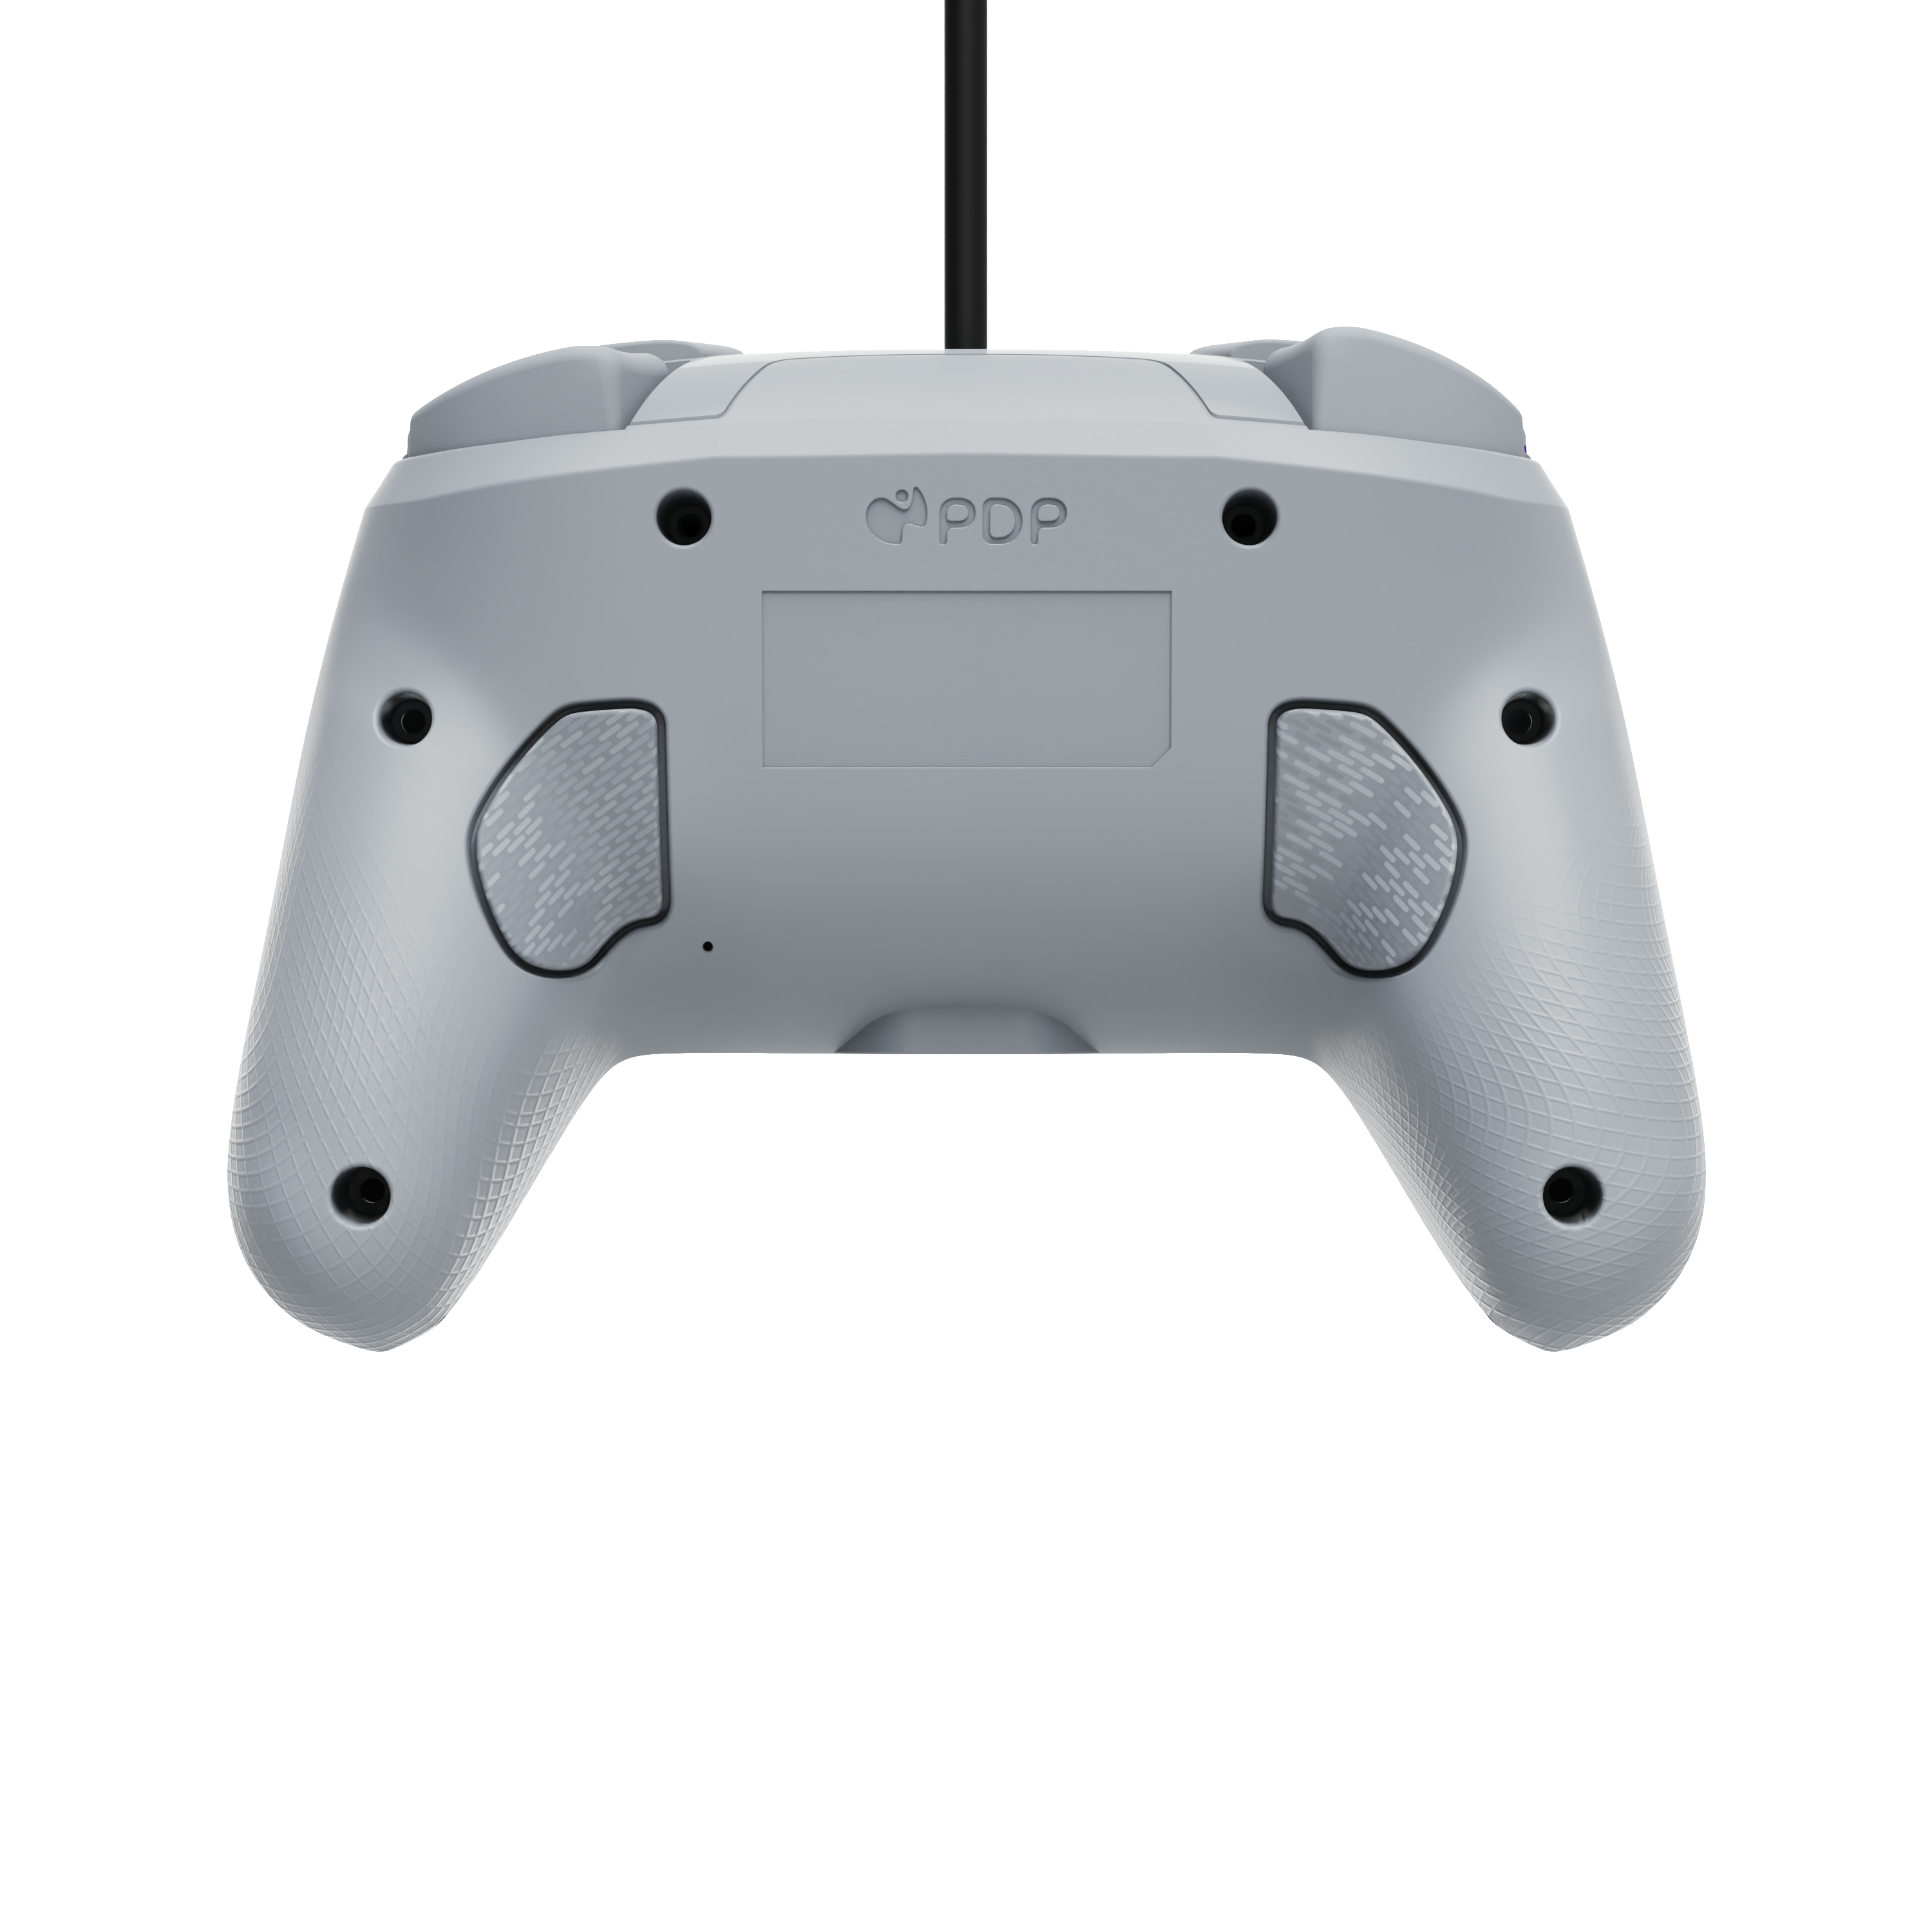 PDP Afterglow Wave Wired Controller for Nintendo Switch - Grey